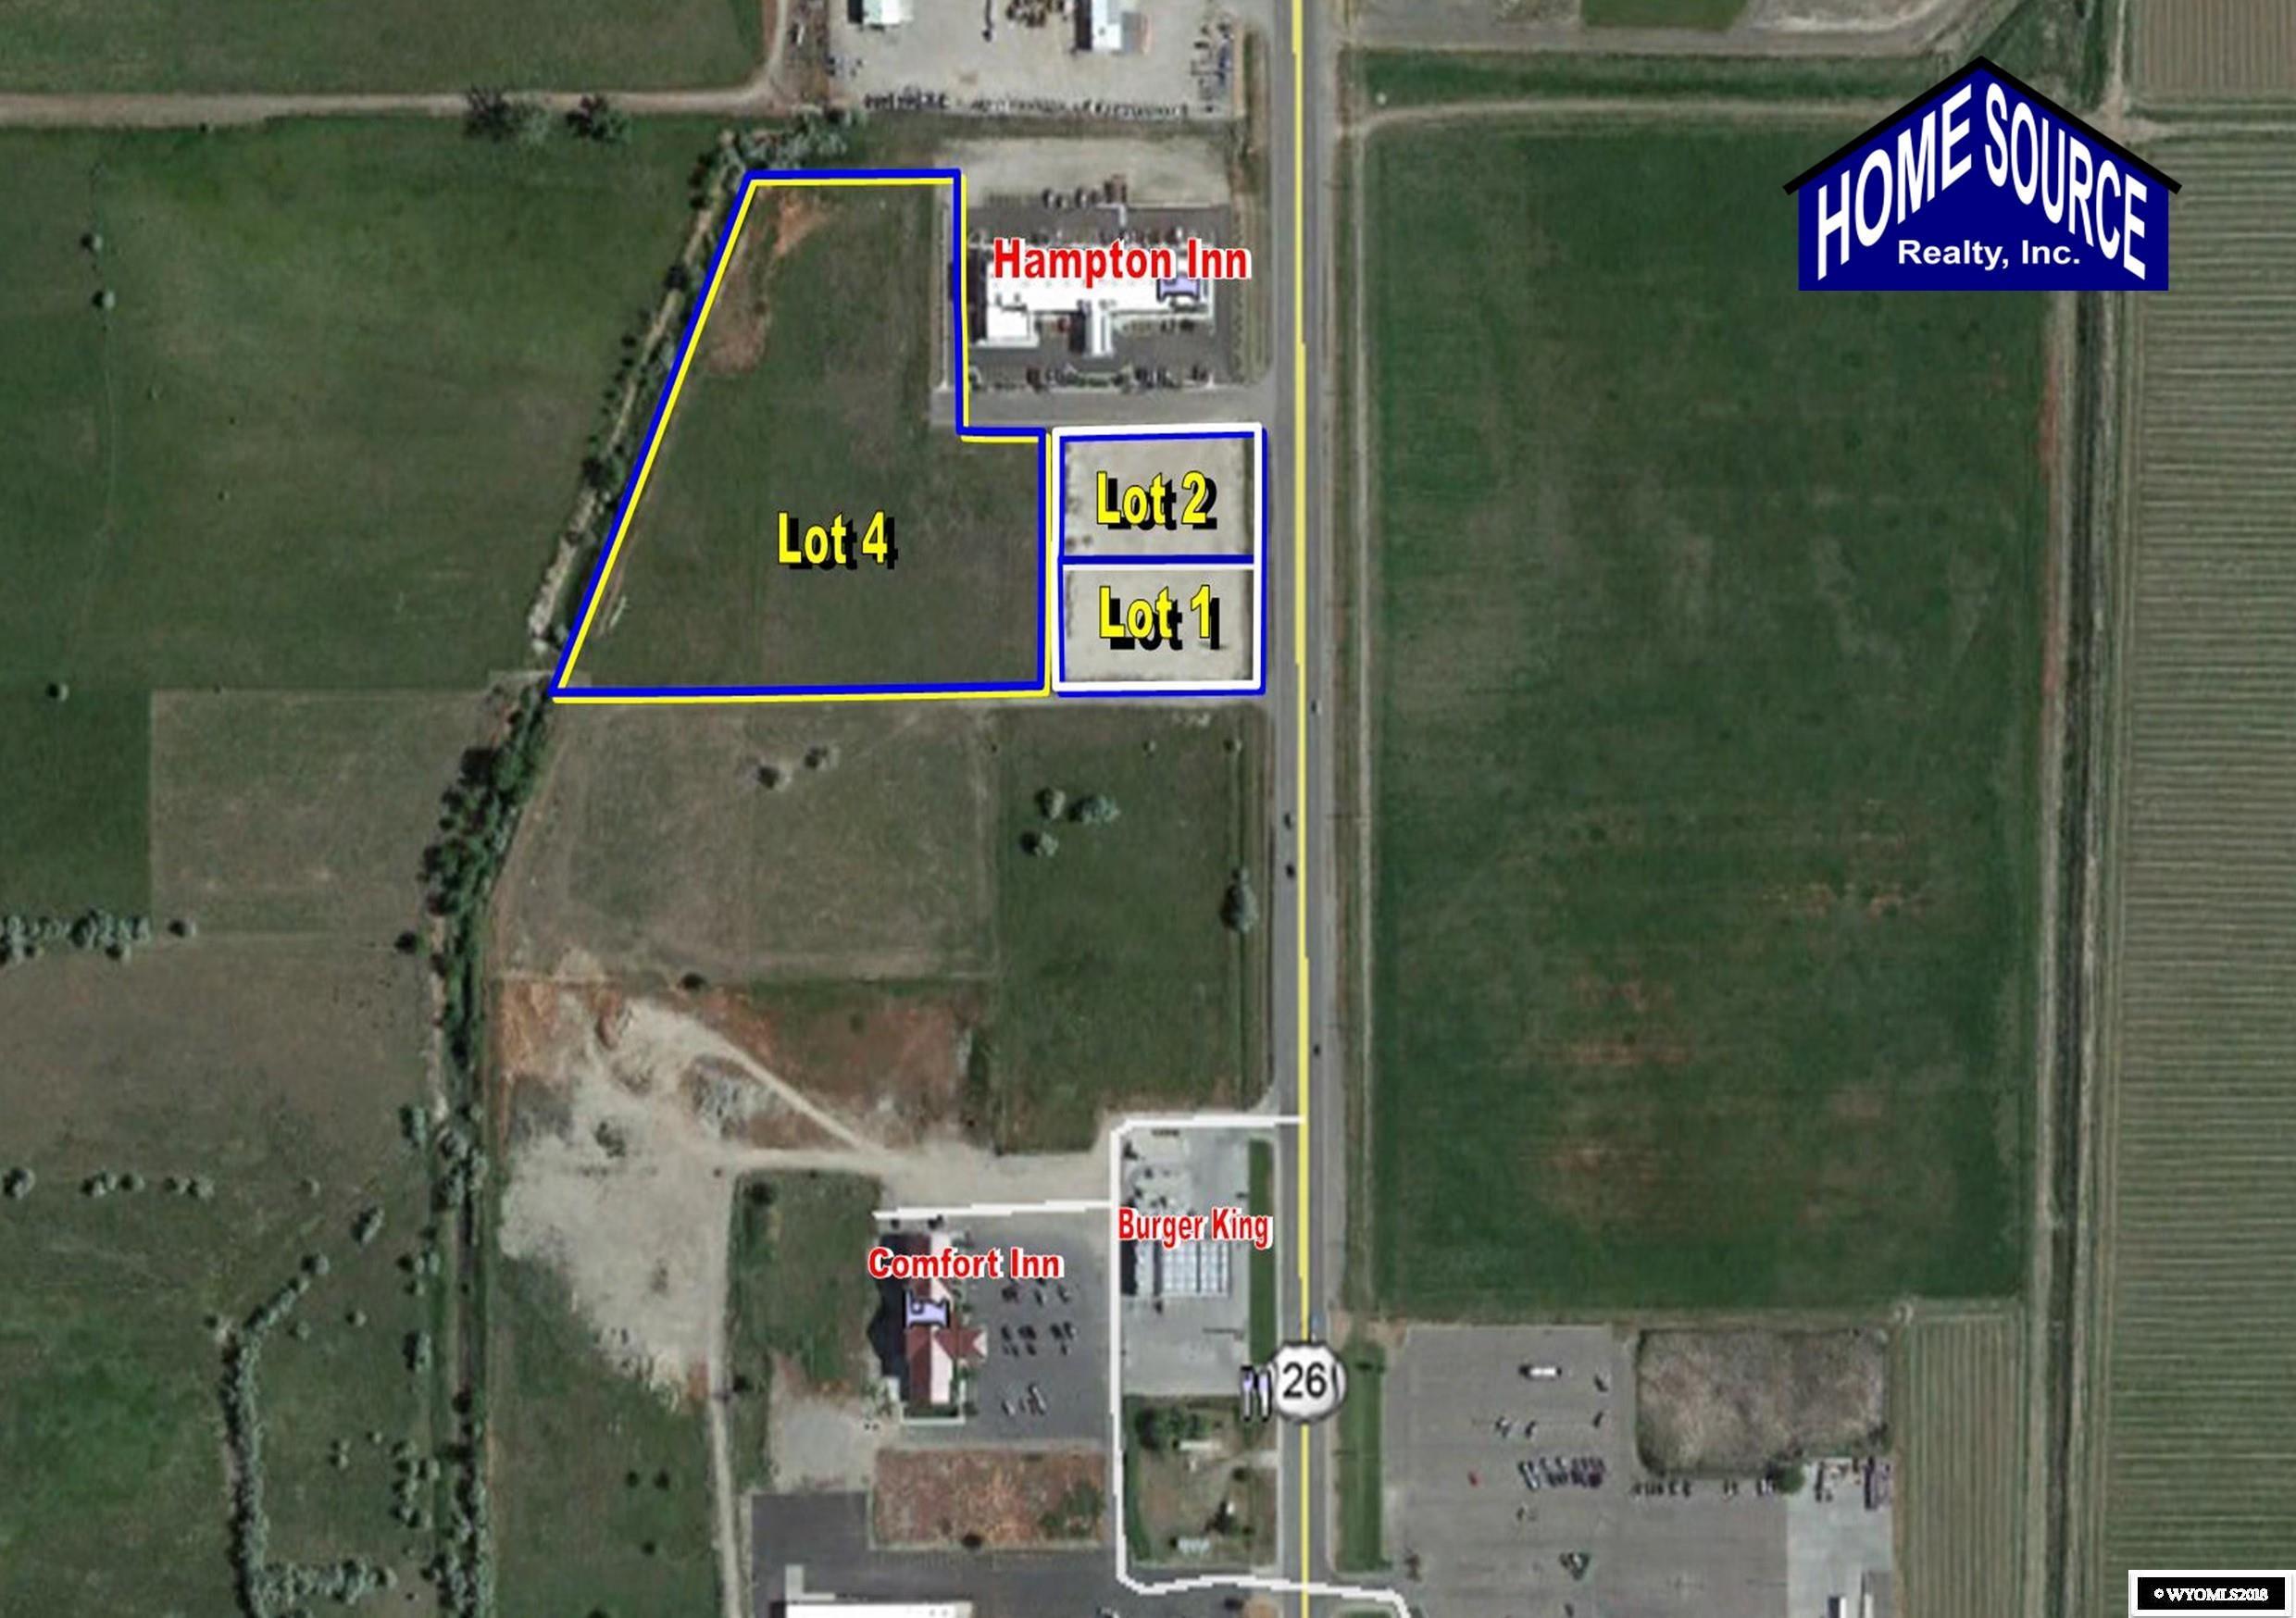 Prime Commercial Land!  Lots 1, 2, and 4 of the Highway 789 Subdivision are located just south of the Hampton Inn.  These lots are available for purchase individually, or as a package.  Lots 1 and 2 are each over an acre and feature Highway 789 frontage.  Lot 4 is 7.75 acres and is just off of the highway frontage.  City water and sewer is available for all three lots.